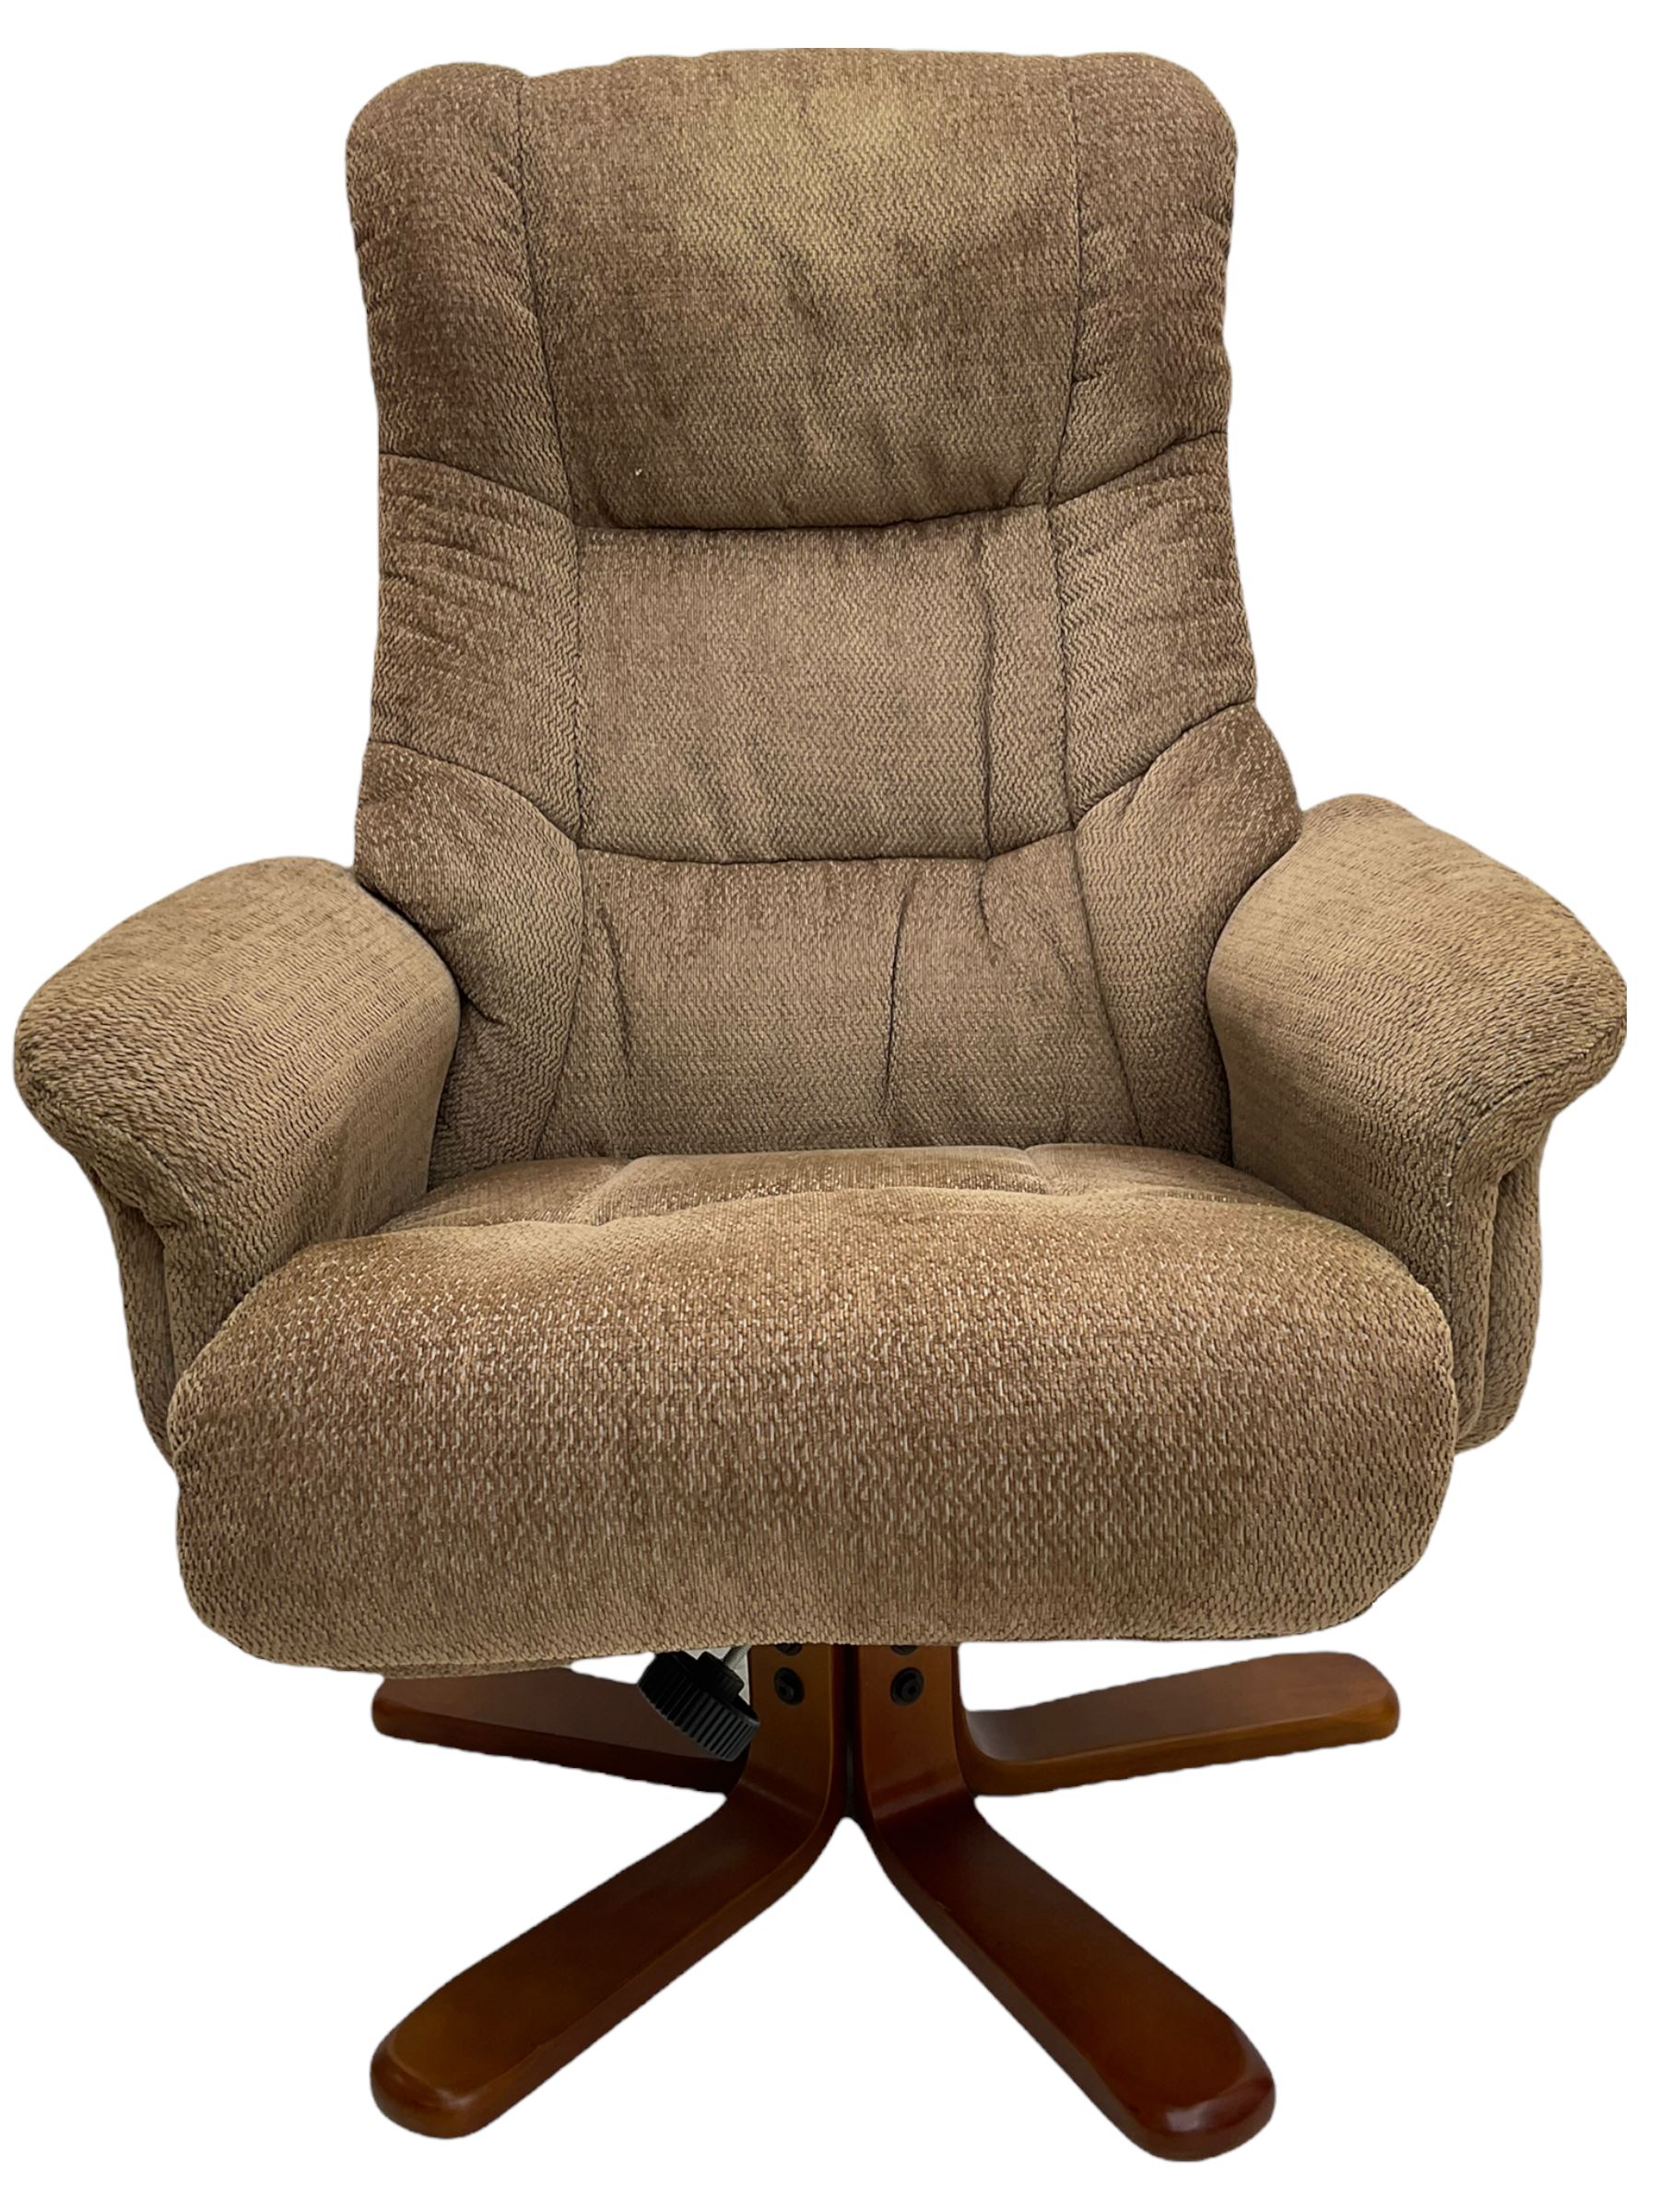 Contemporary lounge chair with matching footstool - Image 3 of 14